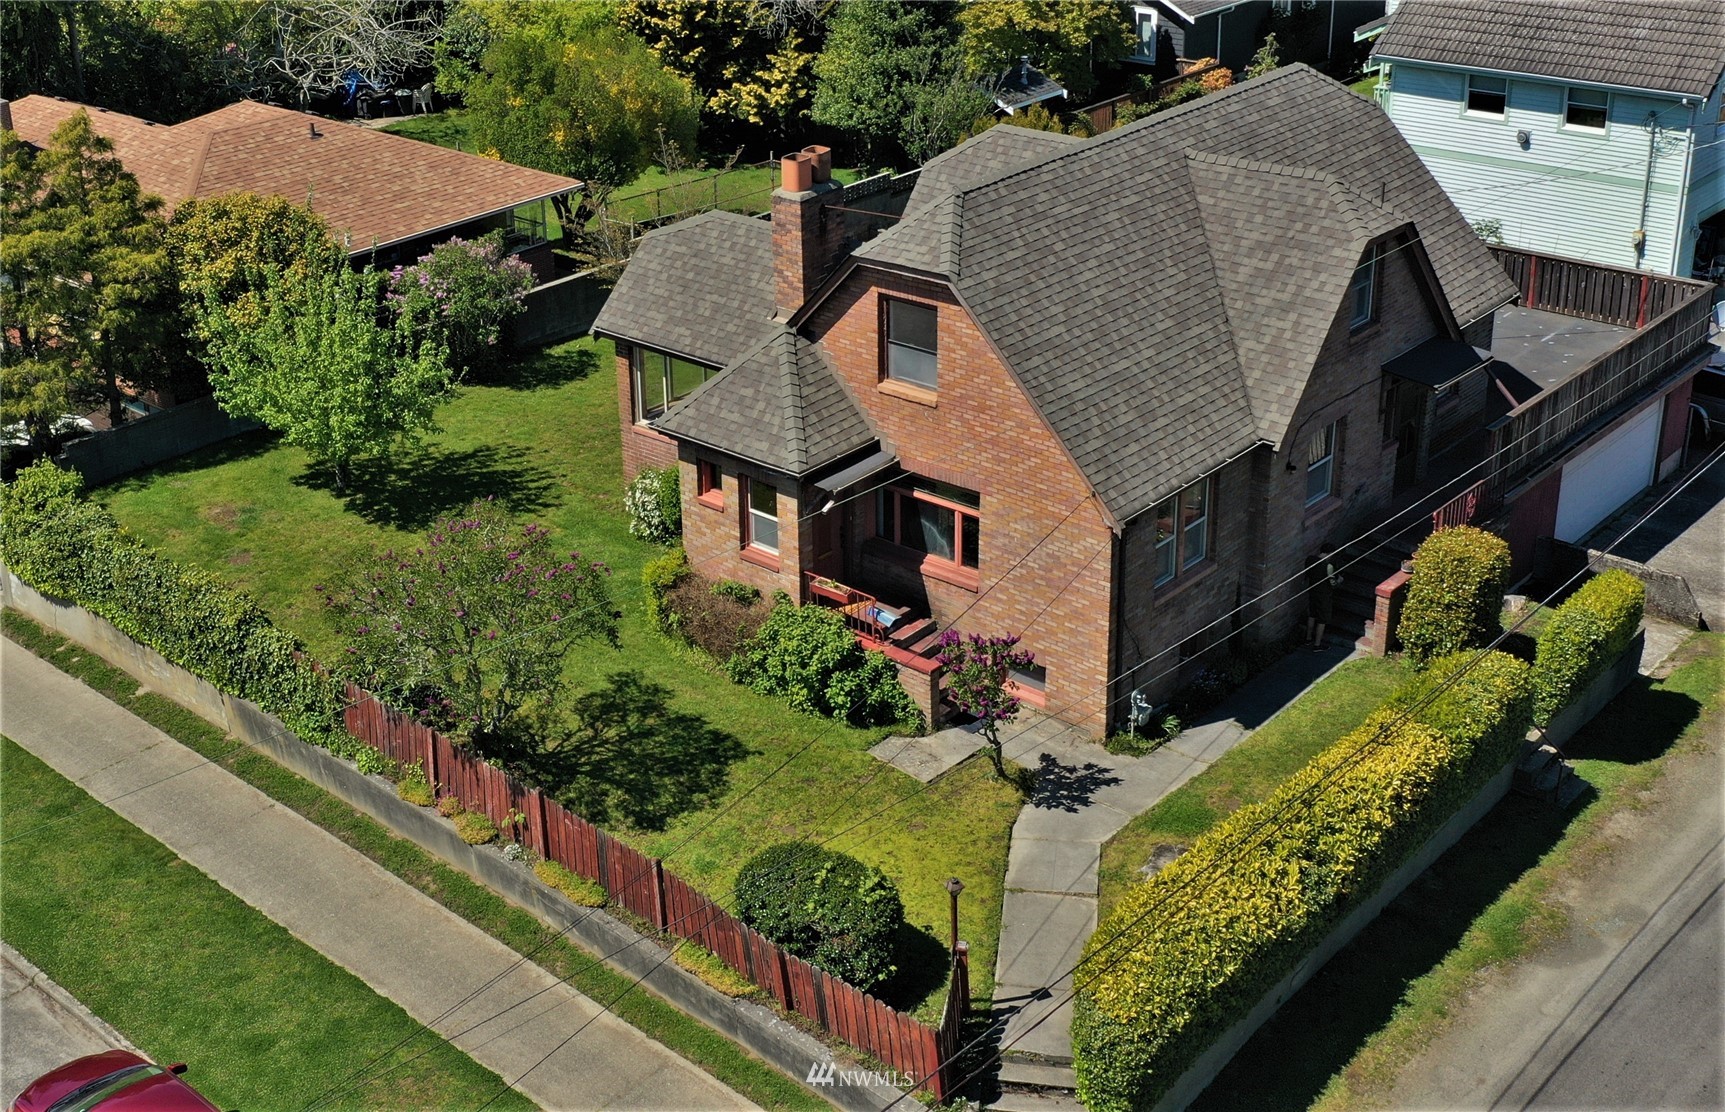 a aerial view of a house with large trees